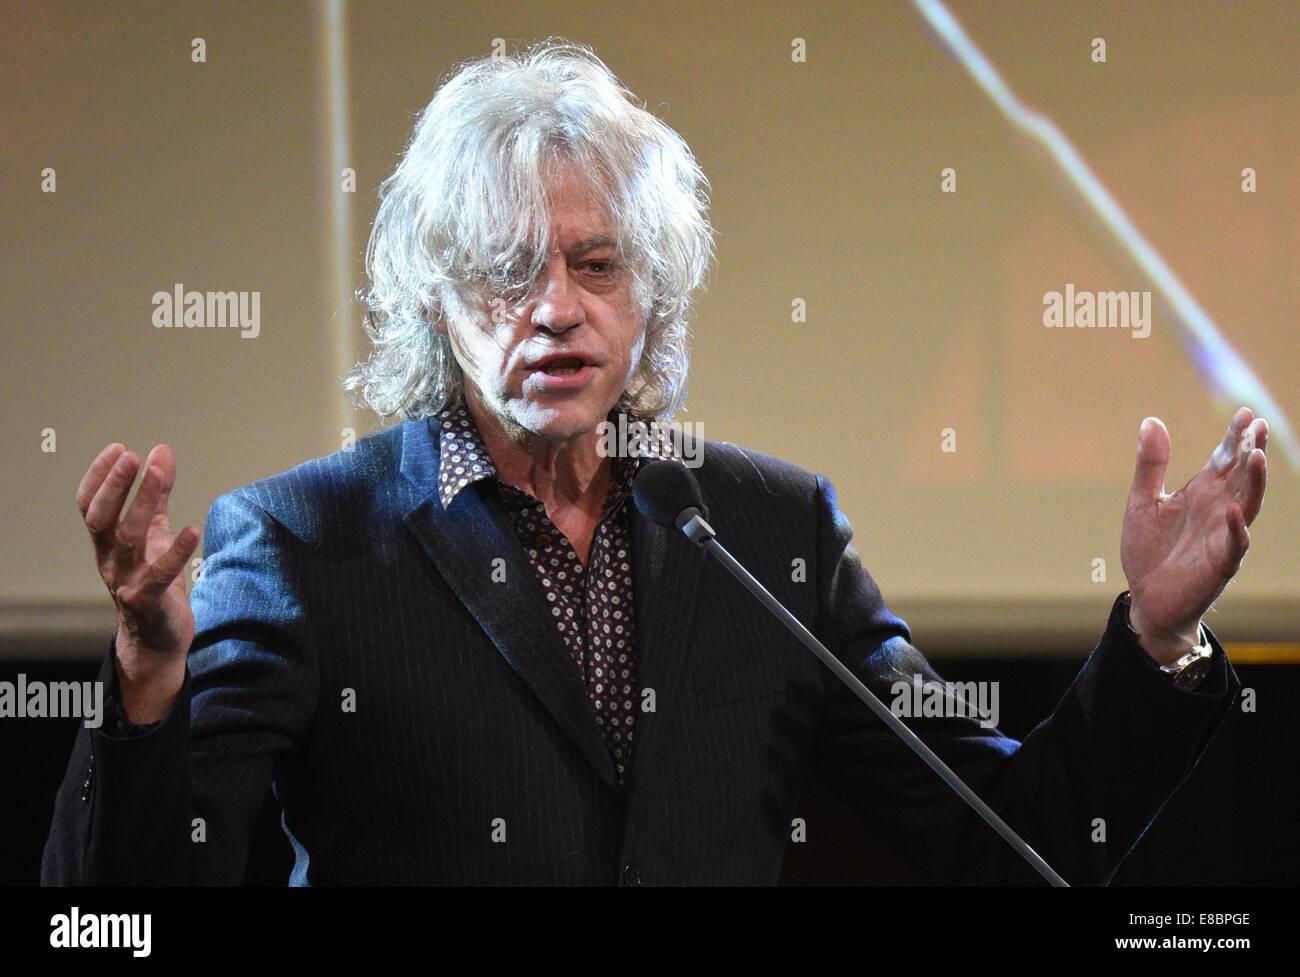 Hattingen, Germany. 03rd Oct, 2014. Musician Bob Geldof gives the laudatory speech for musician Quincy Jones who won in the category 'Charity' at the 10th Steiger Awards in Hattingen, Germany, 03 October 2014. Photo: Henning Kaiser/dpa/Alamy Live News Stock Photo